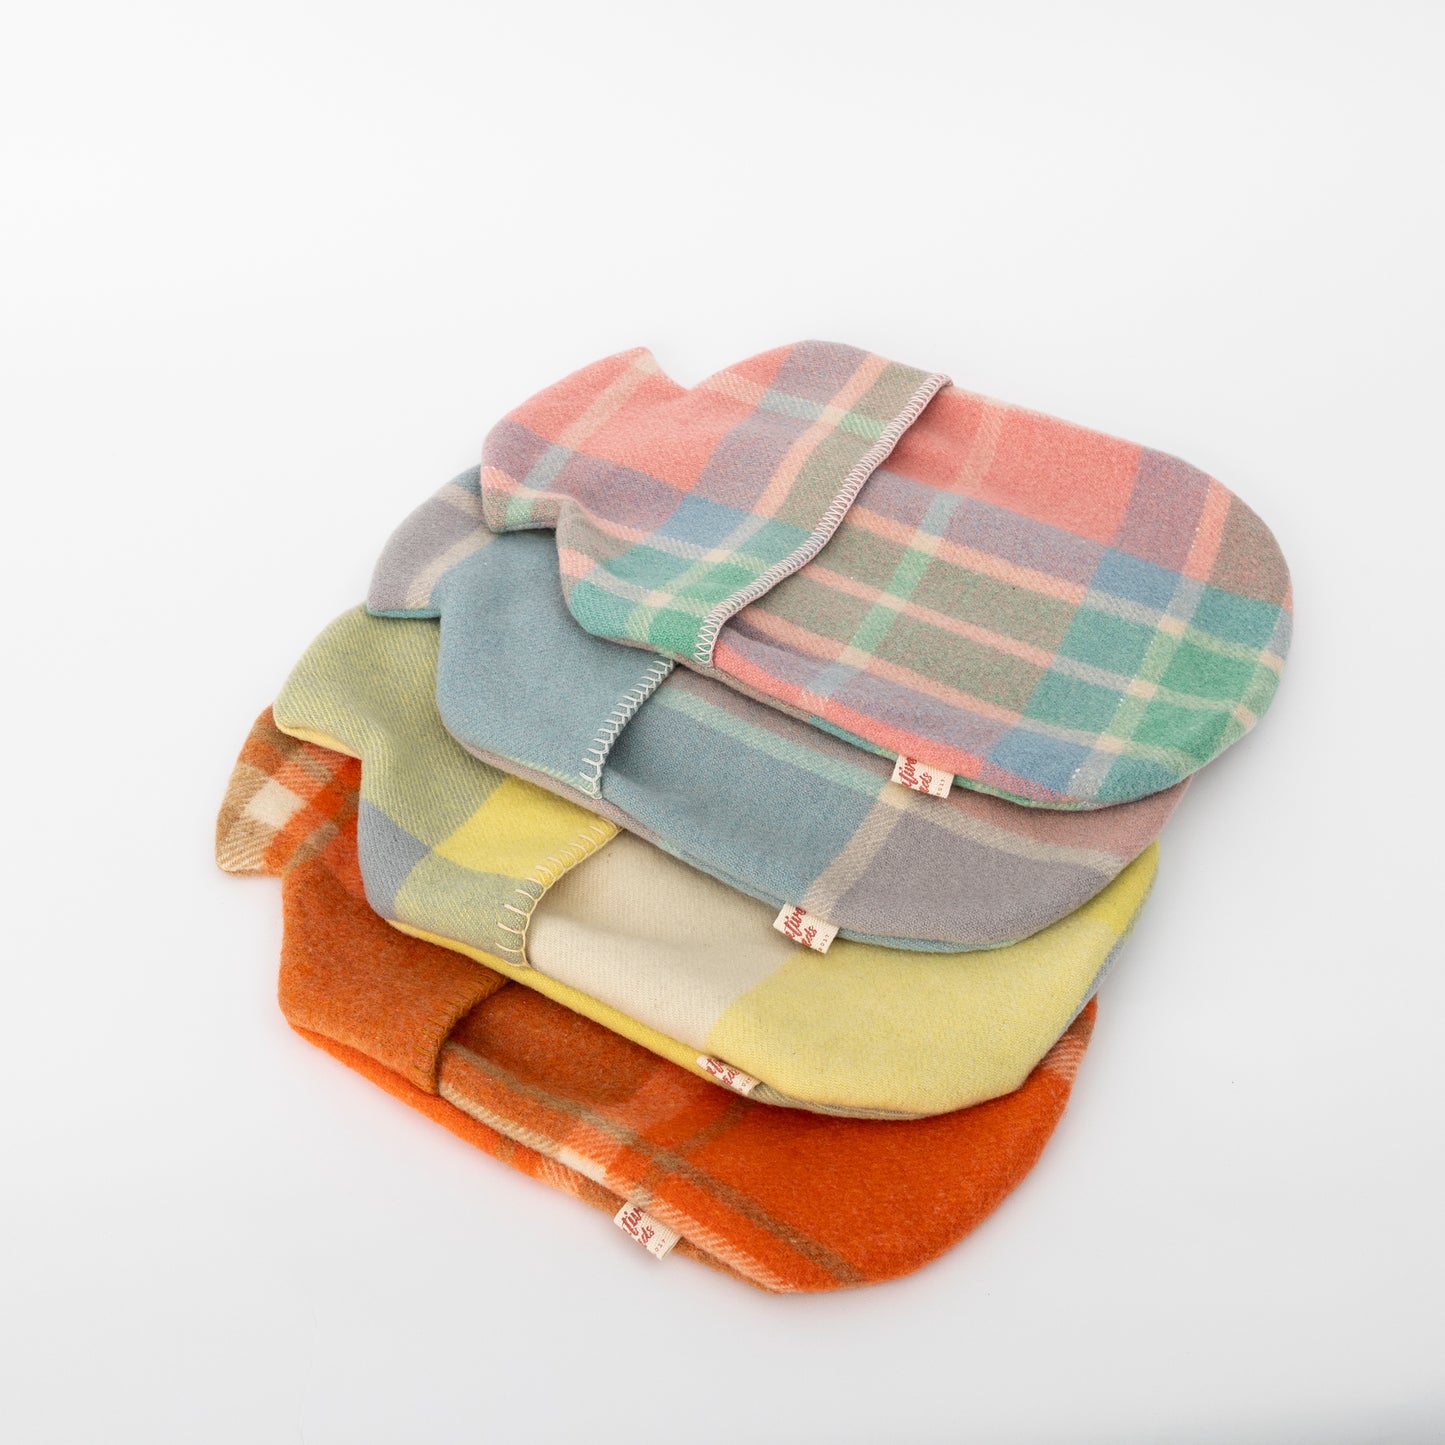 woollen hot water bottle covers - 4 new colour styles stacked on top of one another